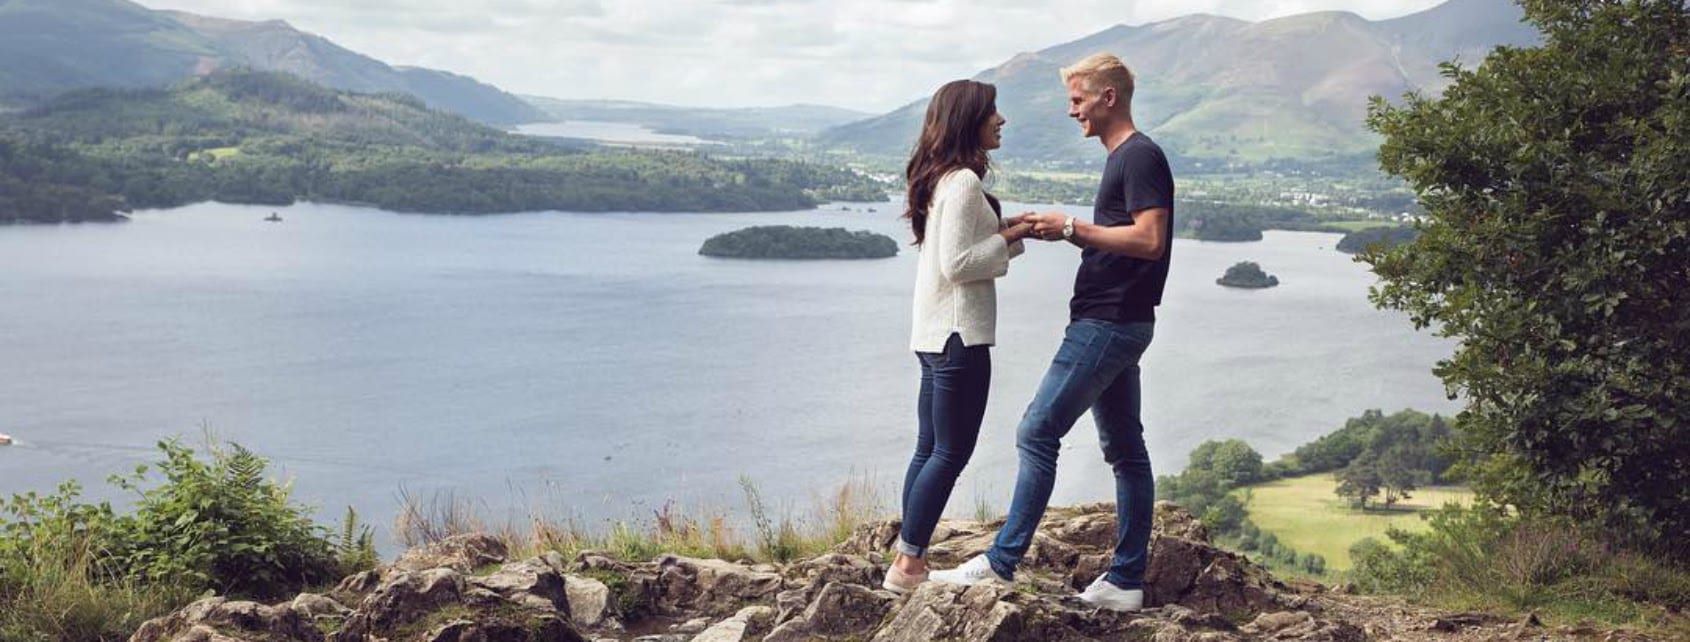 A couple standing on top of a hill overlooking a lake.